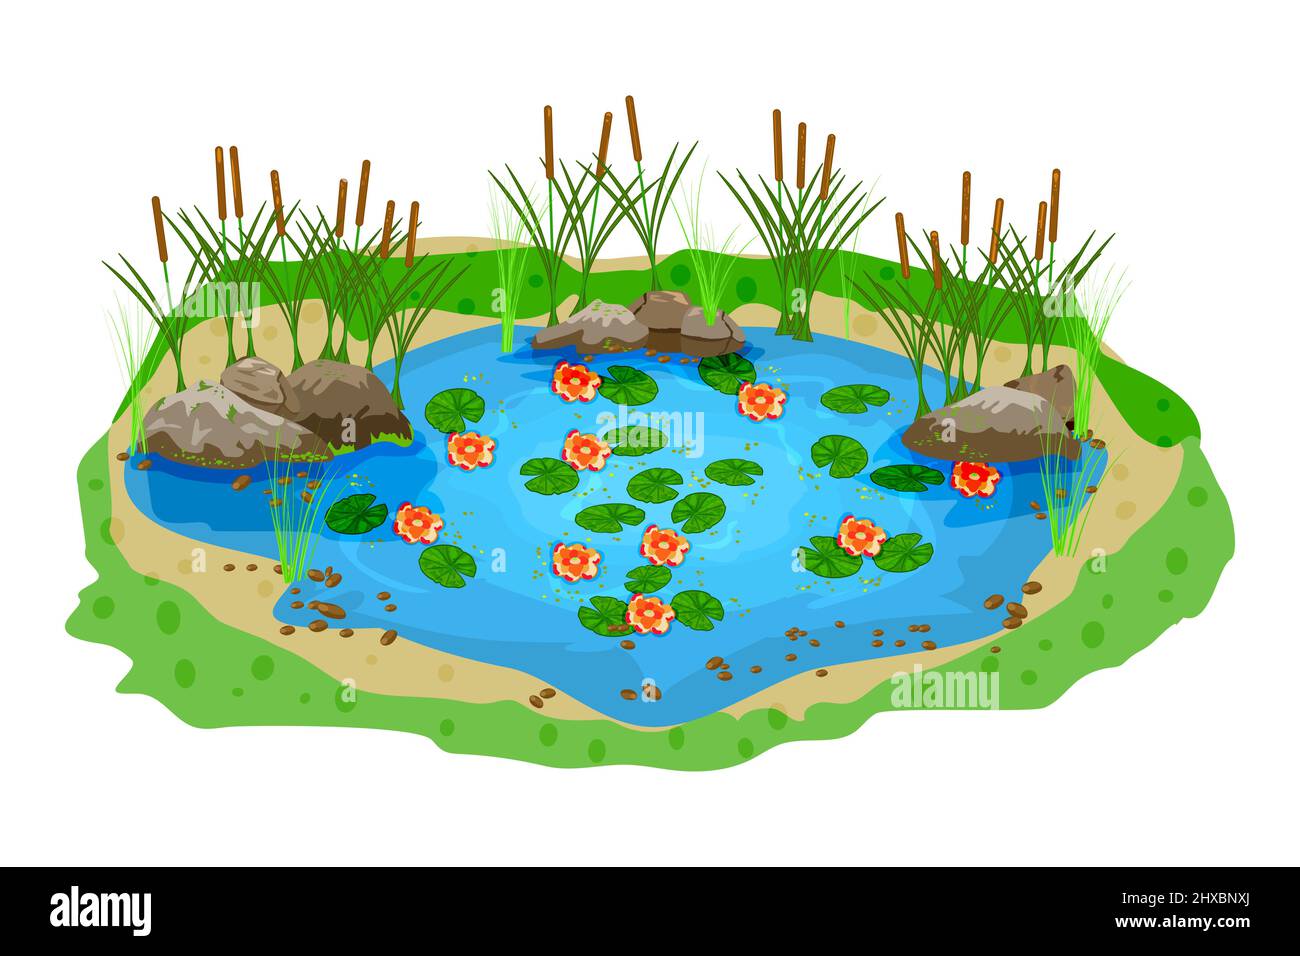 Small blue pond with water lilies,bulrush plants and stones on isolated white background.Oval water reservoir for landscape design.Vector illustration Stock Vector